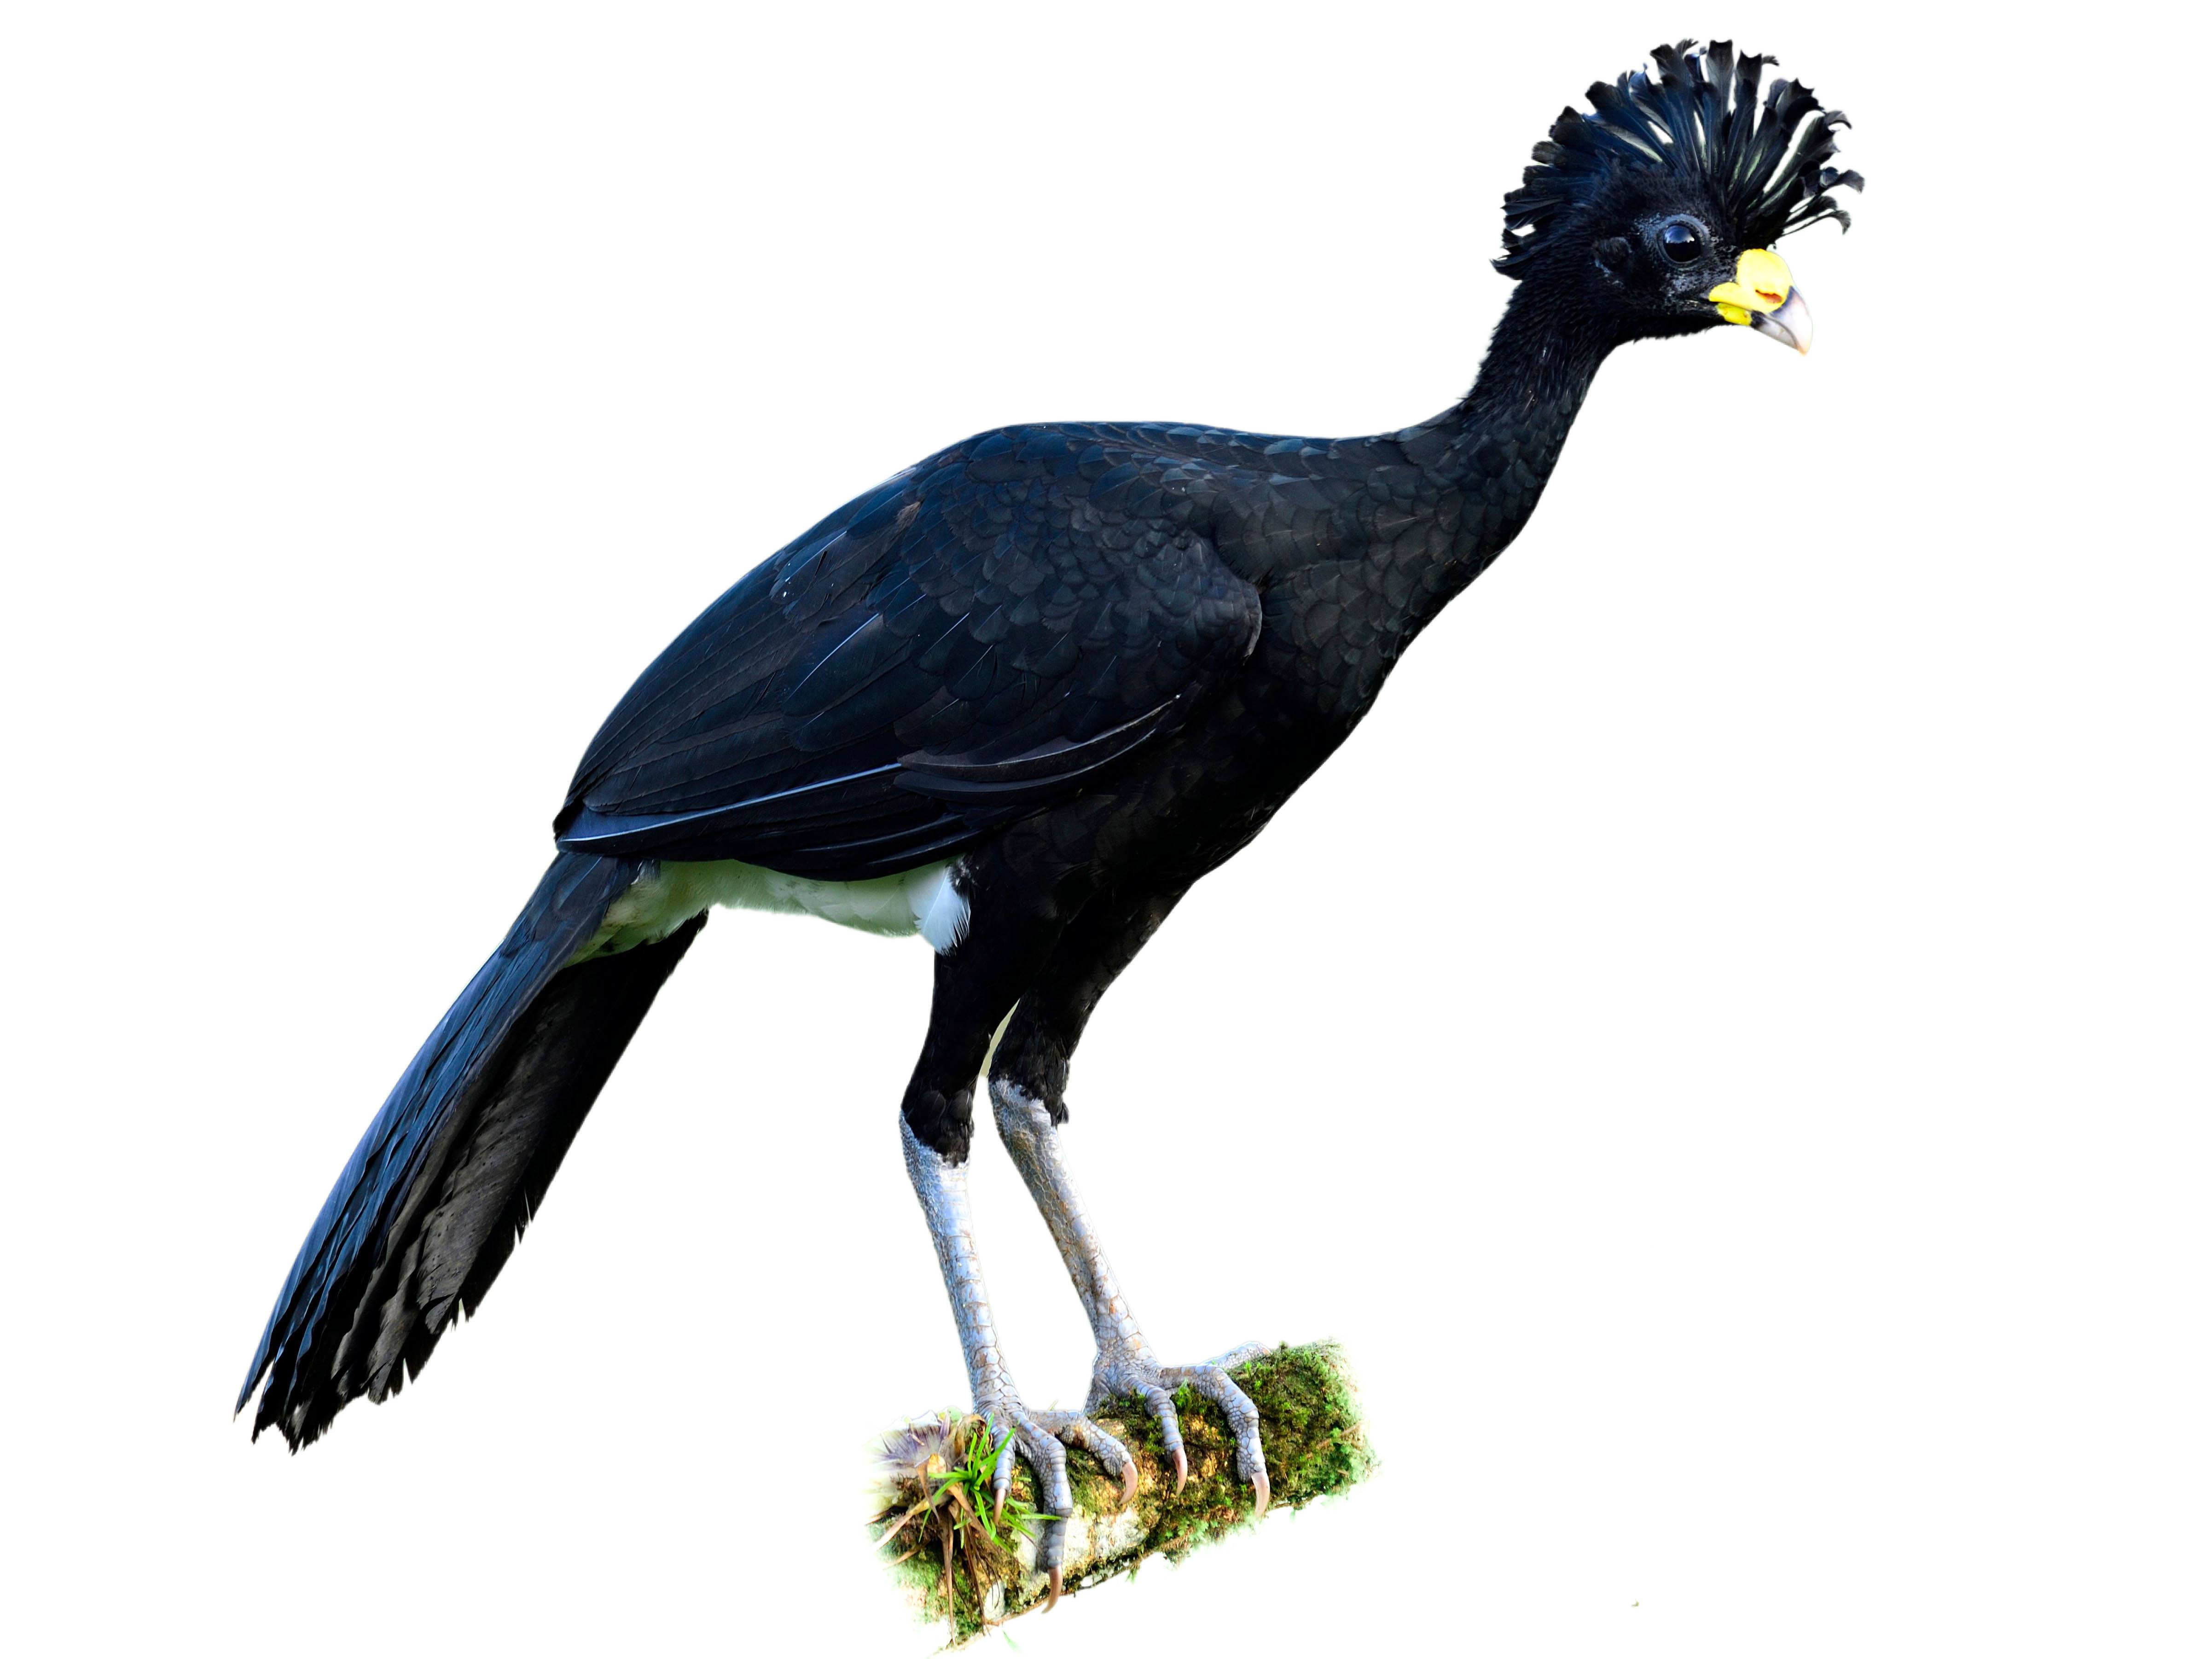 A photo of a Great Curassow (Crax rubra), male